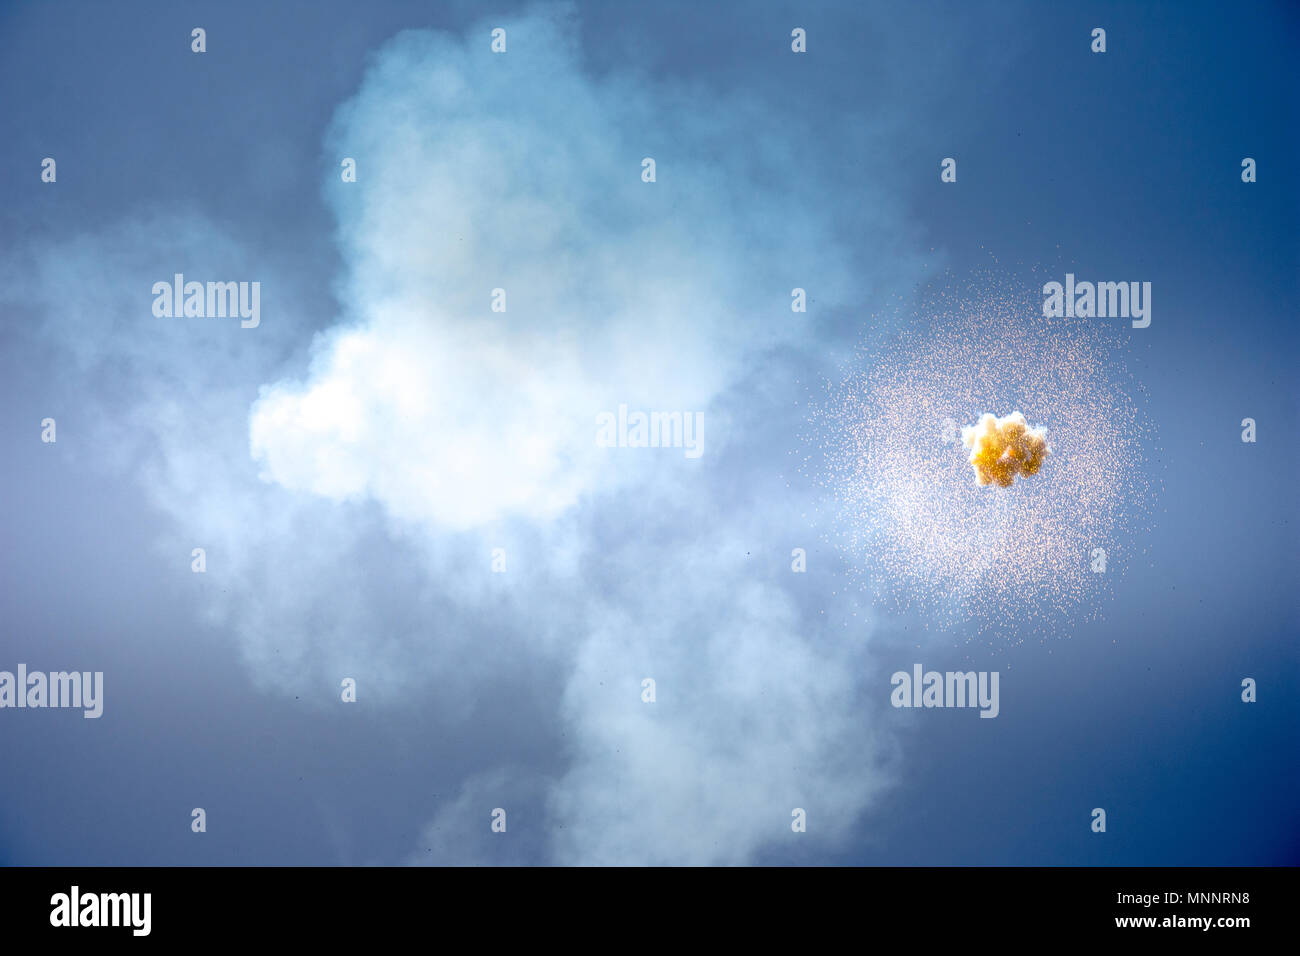 Abstract firework explosion with blue sky at the background. Stock Photo